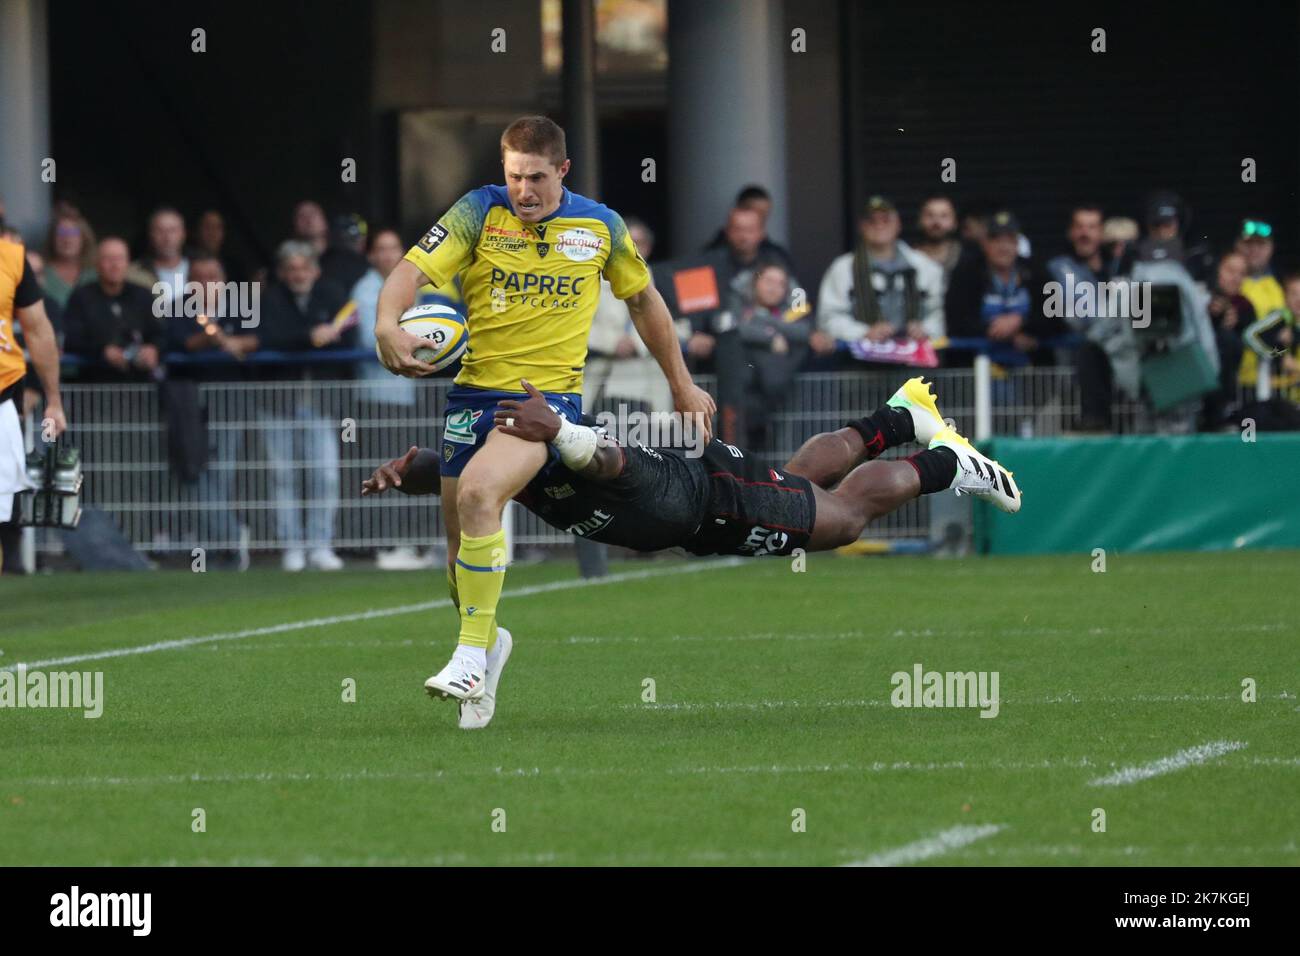 Thierry LARRET / Maxppp. Rugby Top 14 : ASM Clermont Auvergne vs Lyon Olympique Universitaire Rugby. Stade Marcel Michelin, Clermont-Ferrand (63), le 1er Octobre 2022.NEWSOME Alex (ASM) Stock Photo